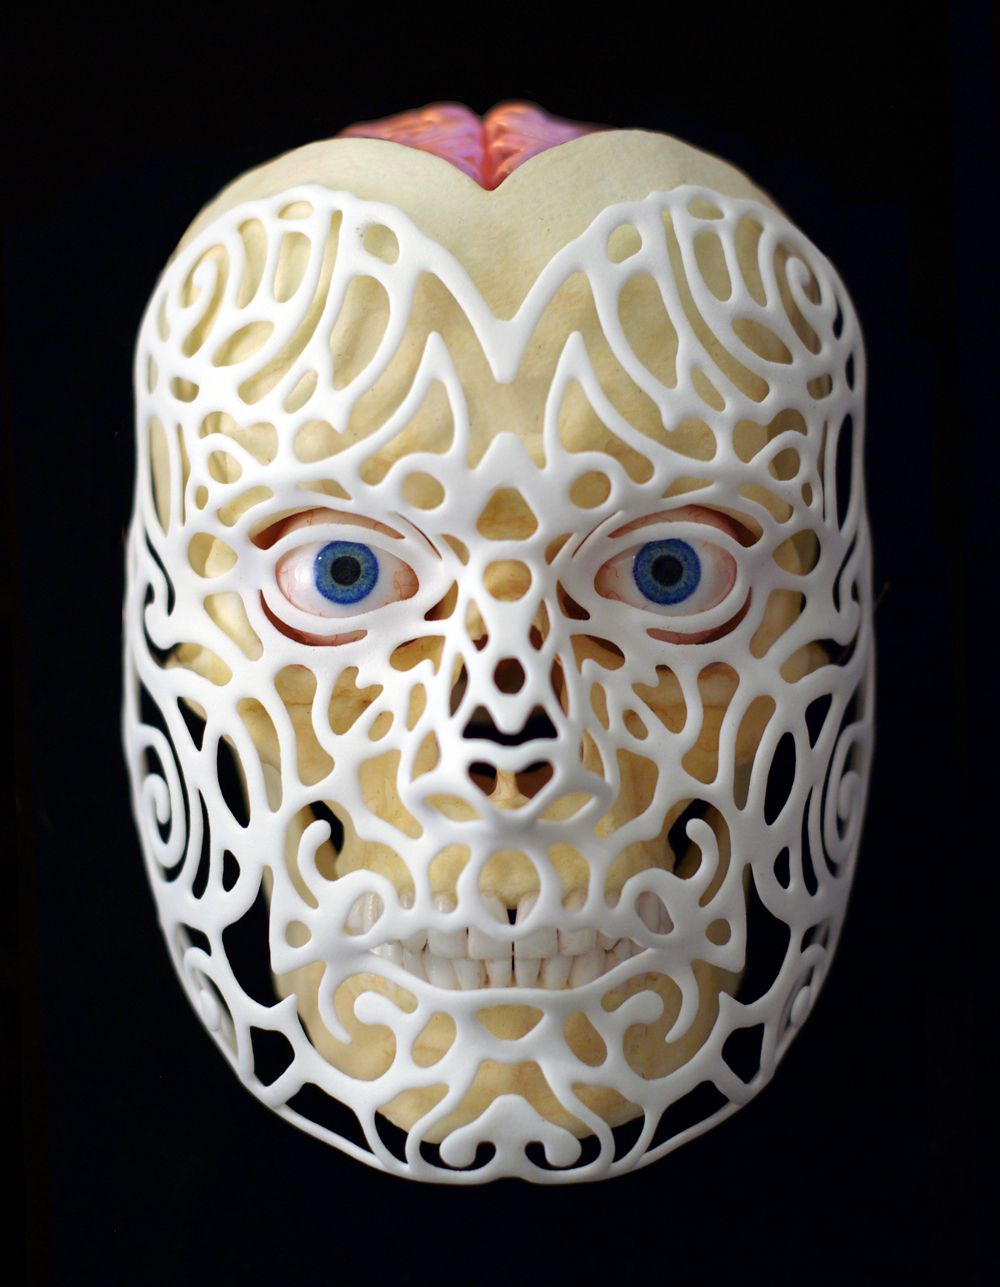 21st Century Self Portrait An Incredible Anatomical 3d Printed Sculpture By Joshua Harker 1